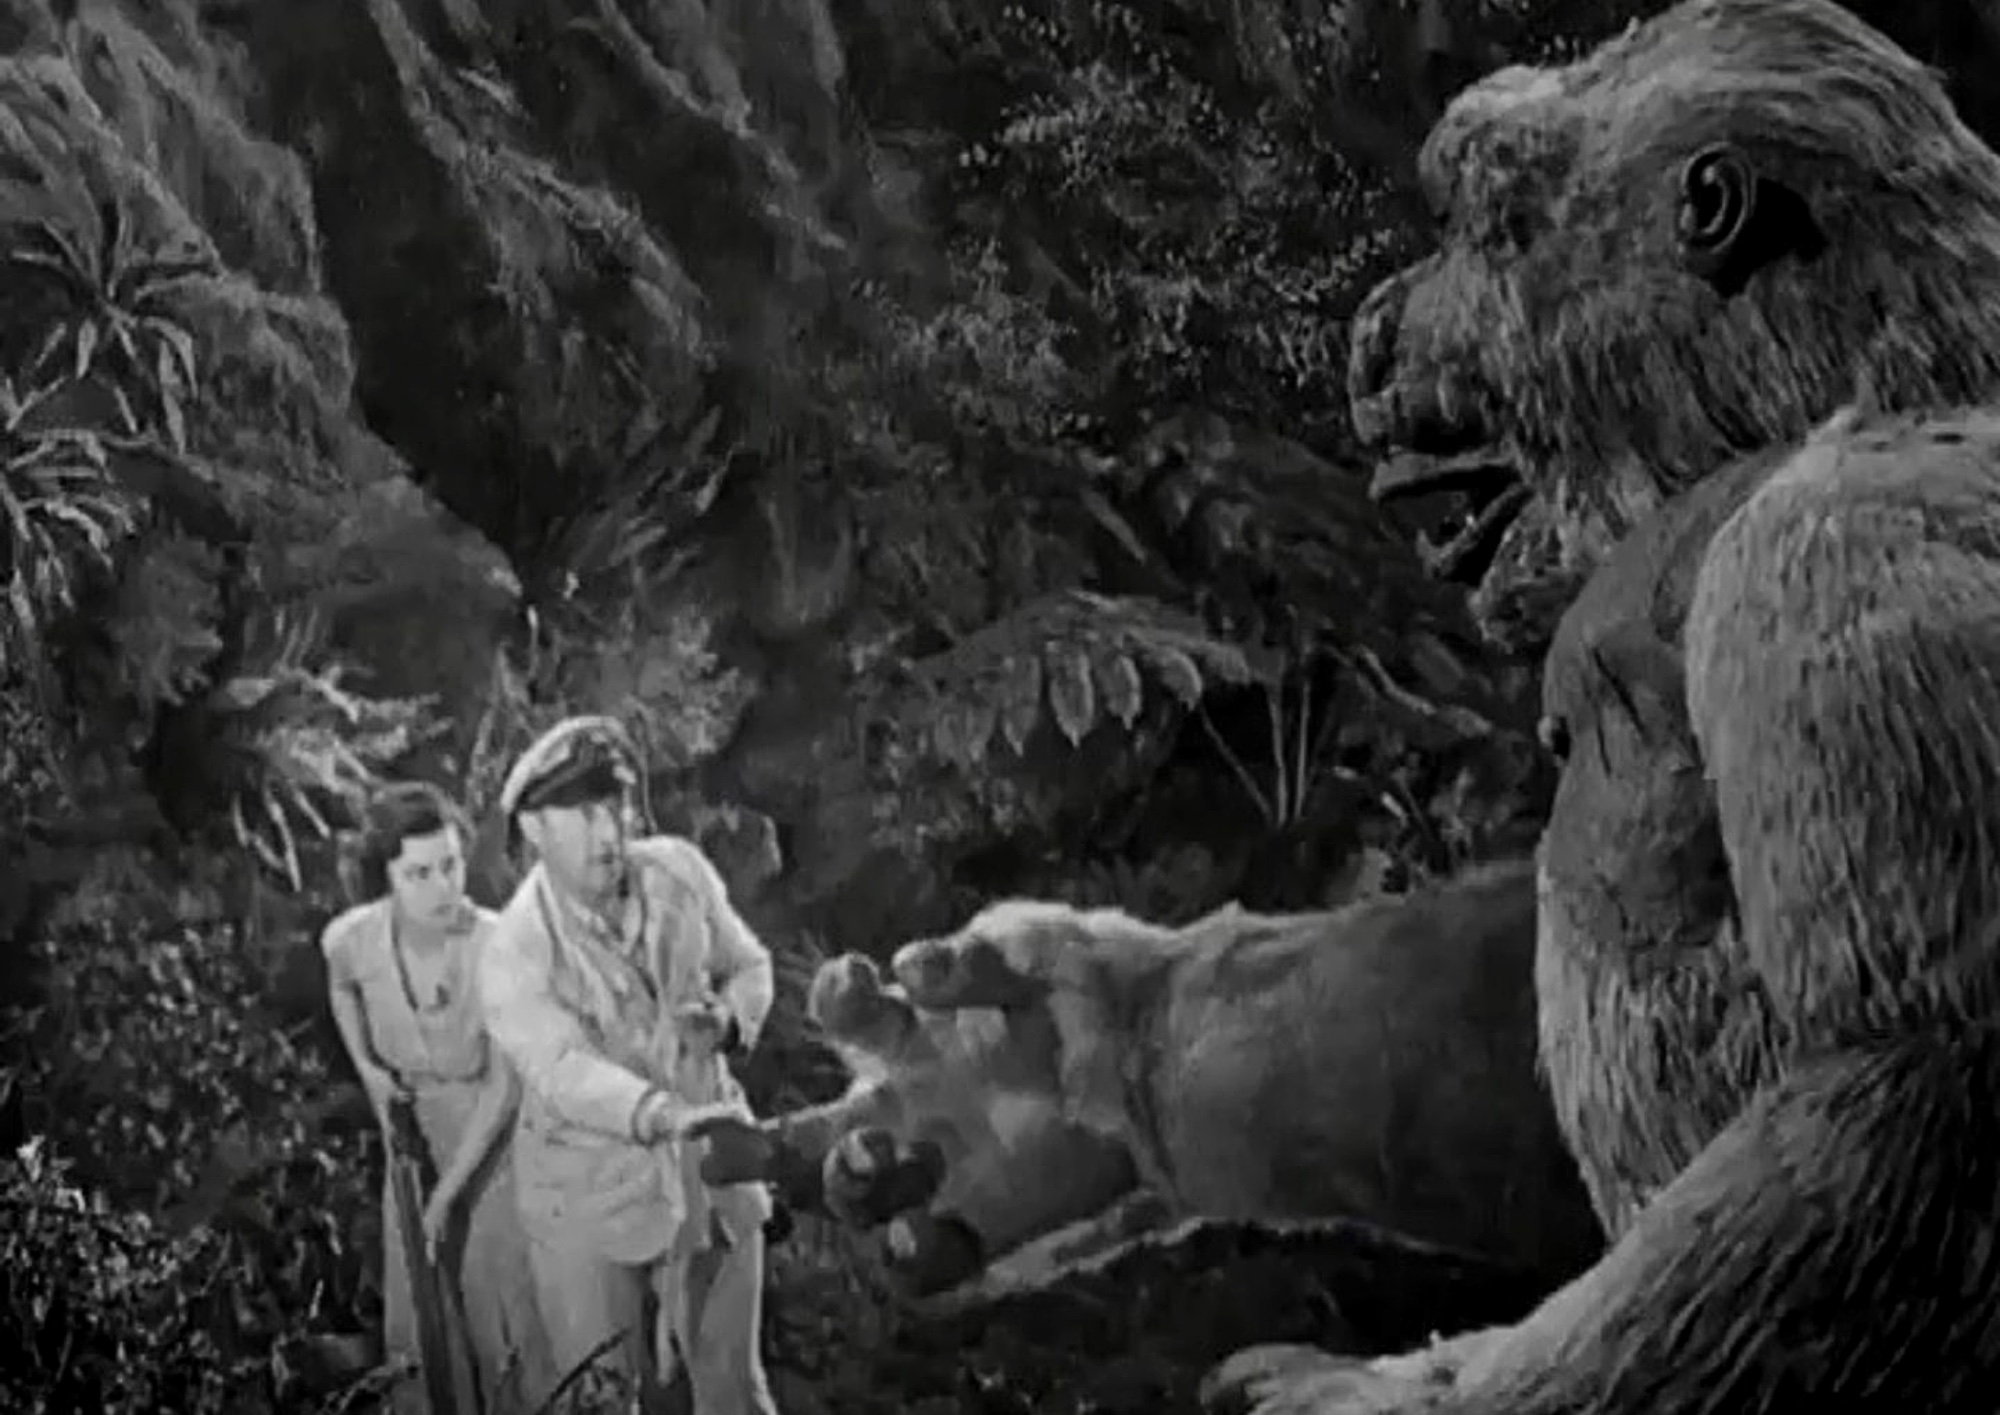 Scene from the 1933 film Son of Kong.